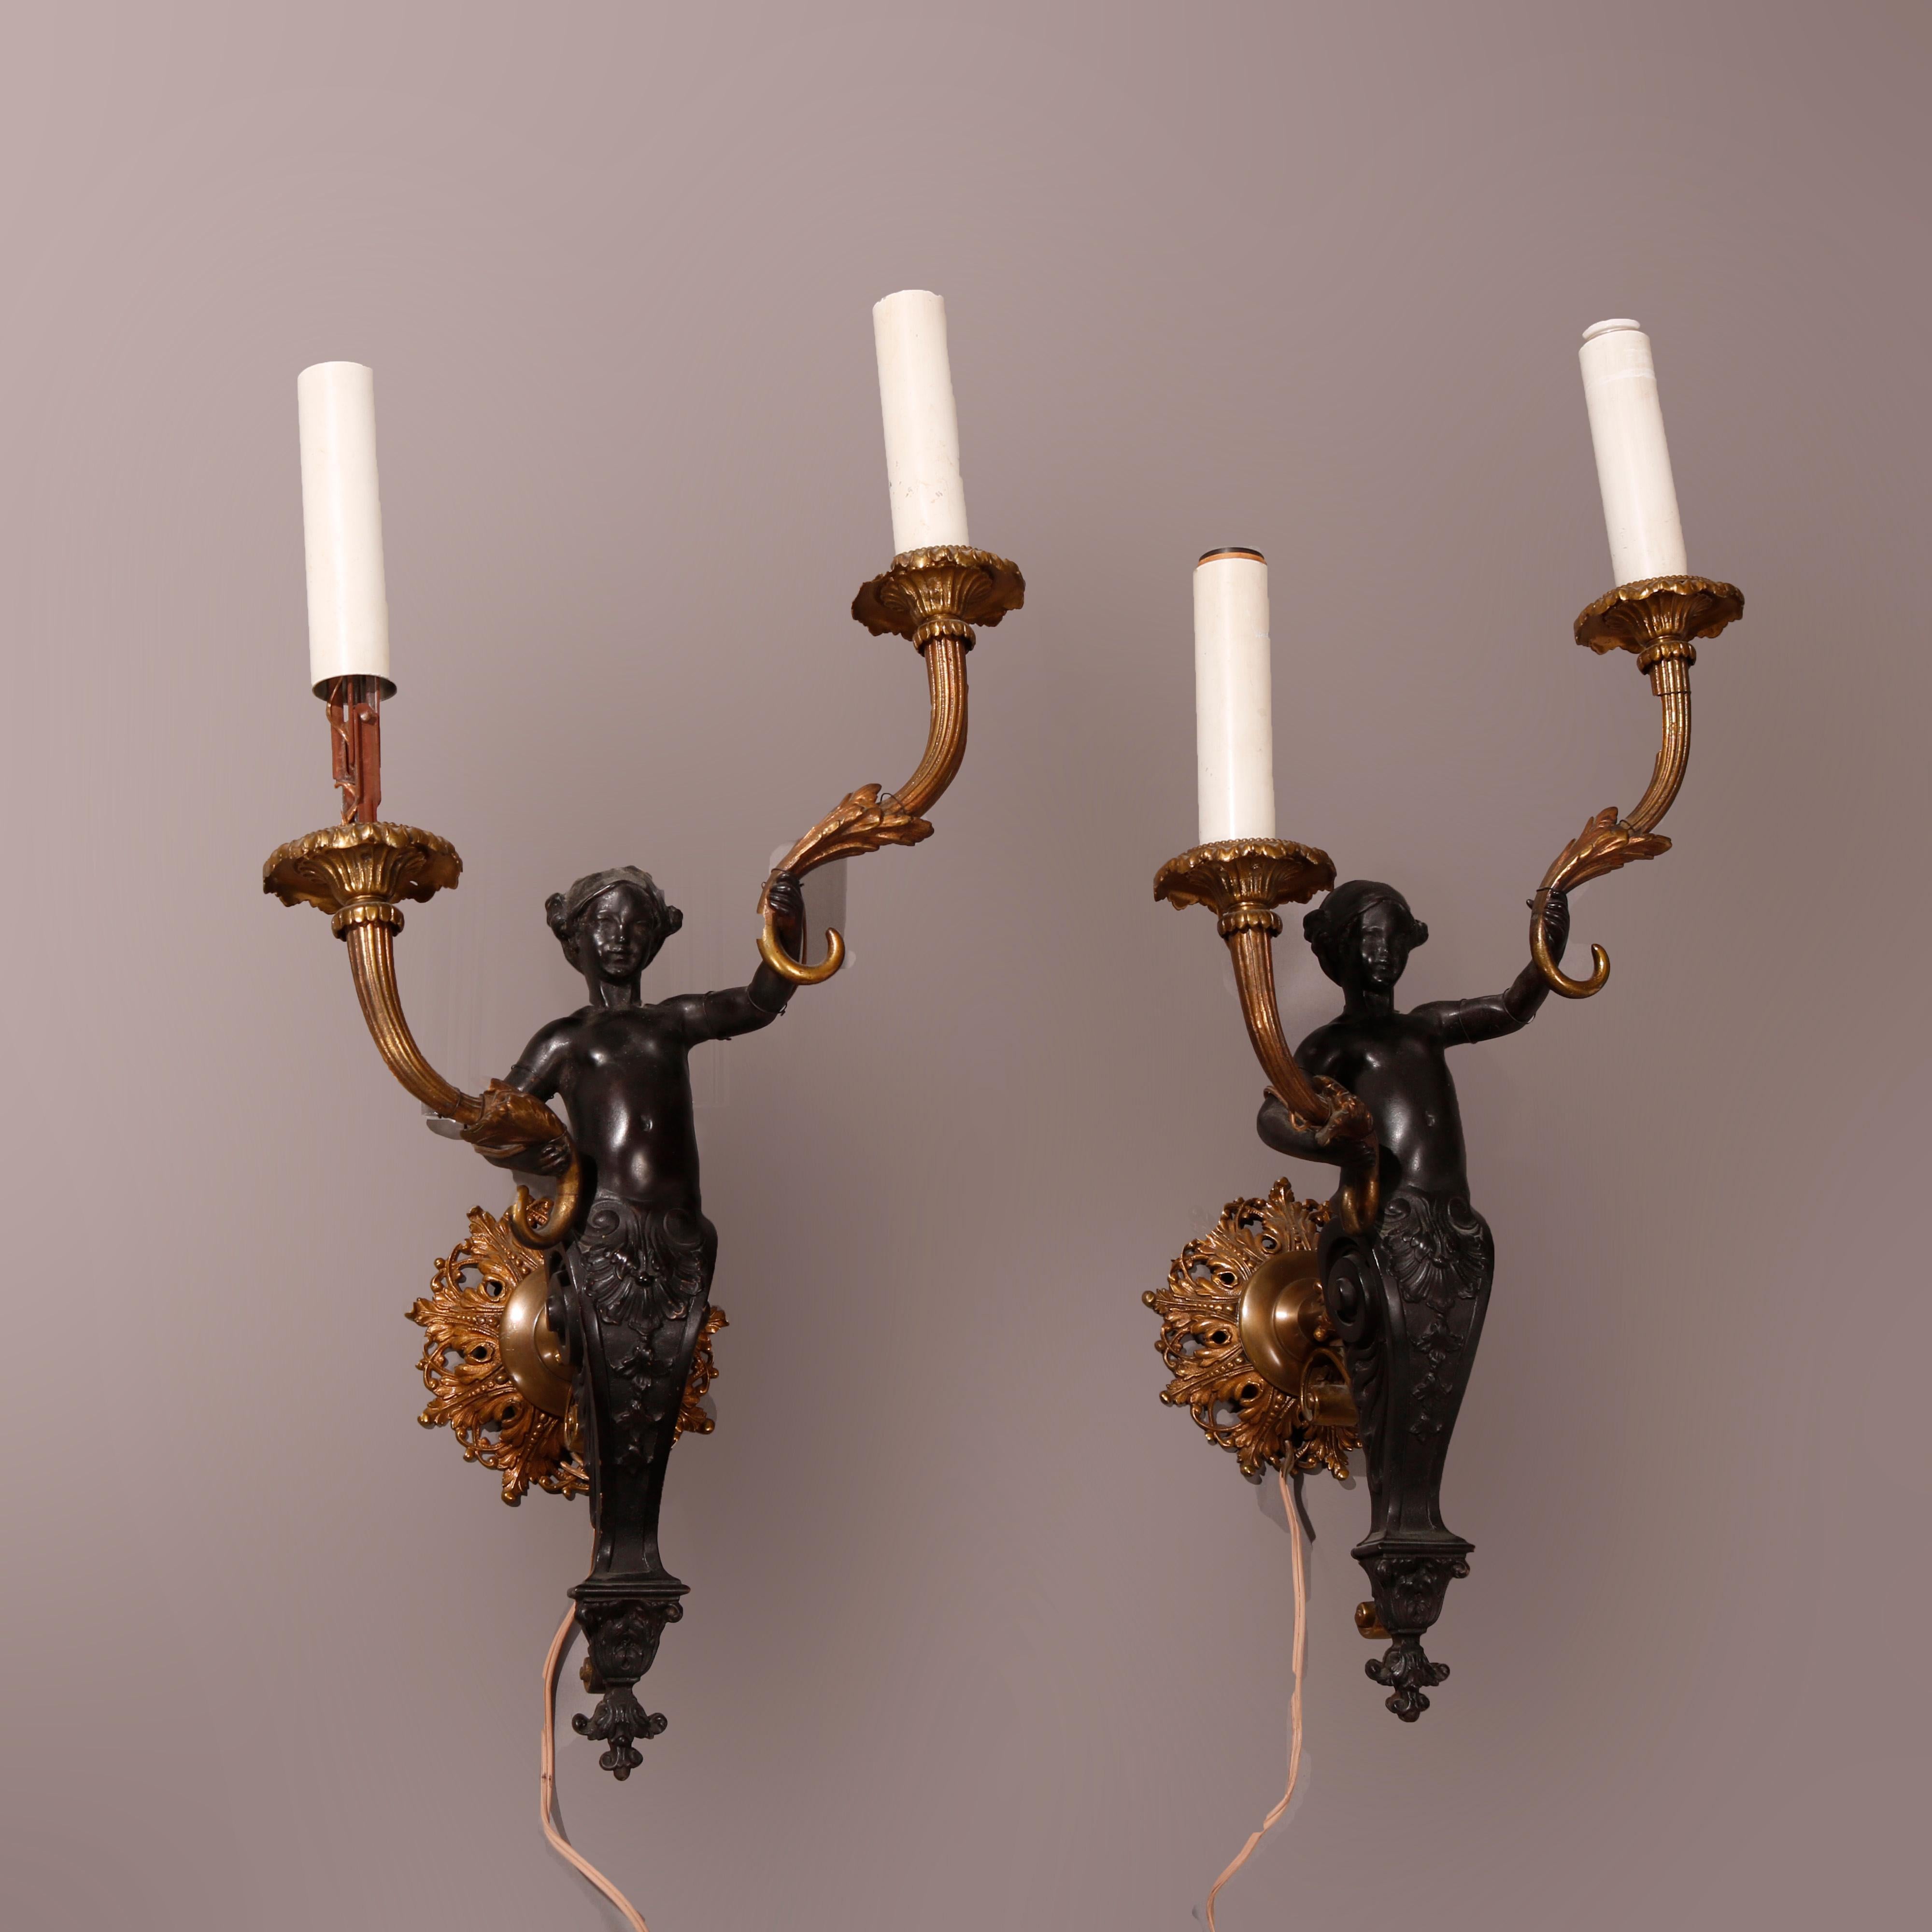 An antique pair of Baroque style figural electrified wall sconces offer cast bronze construction with central ebonized female caryatids holding foliate form arms terminating in candle lights, c1900

Measures - 23.5''H X 11.5''W X 8.75''D.